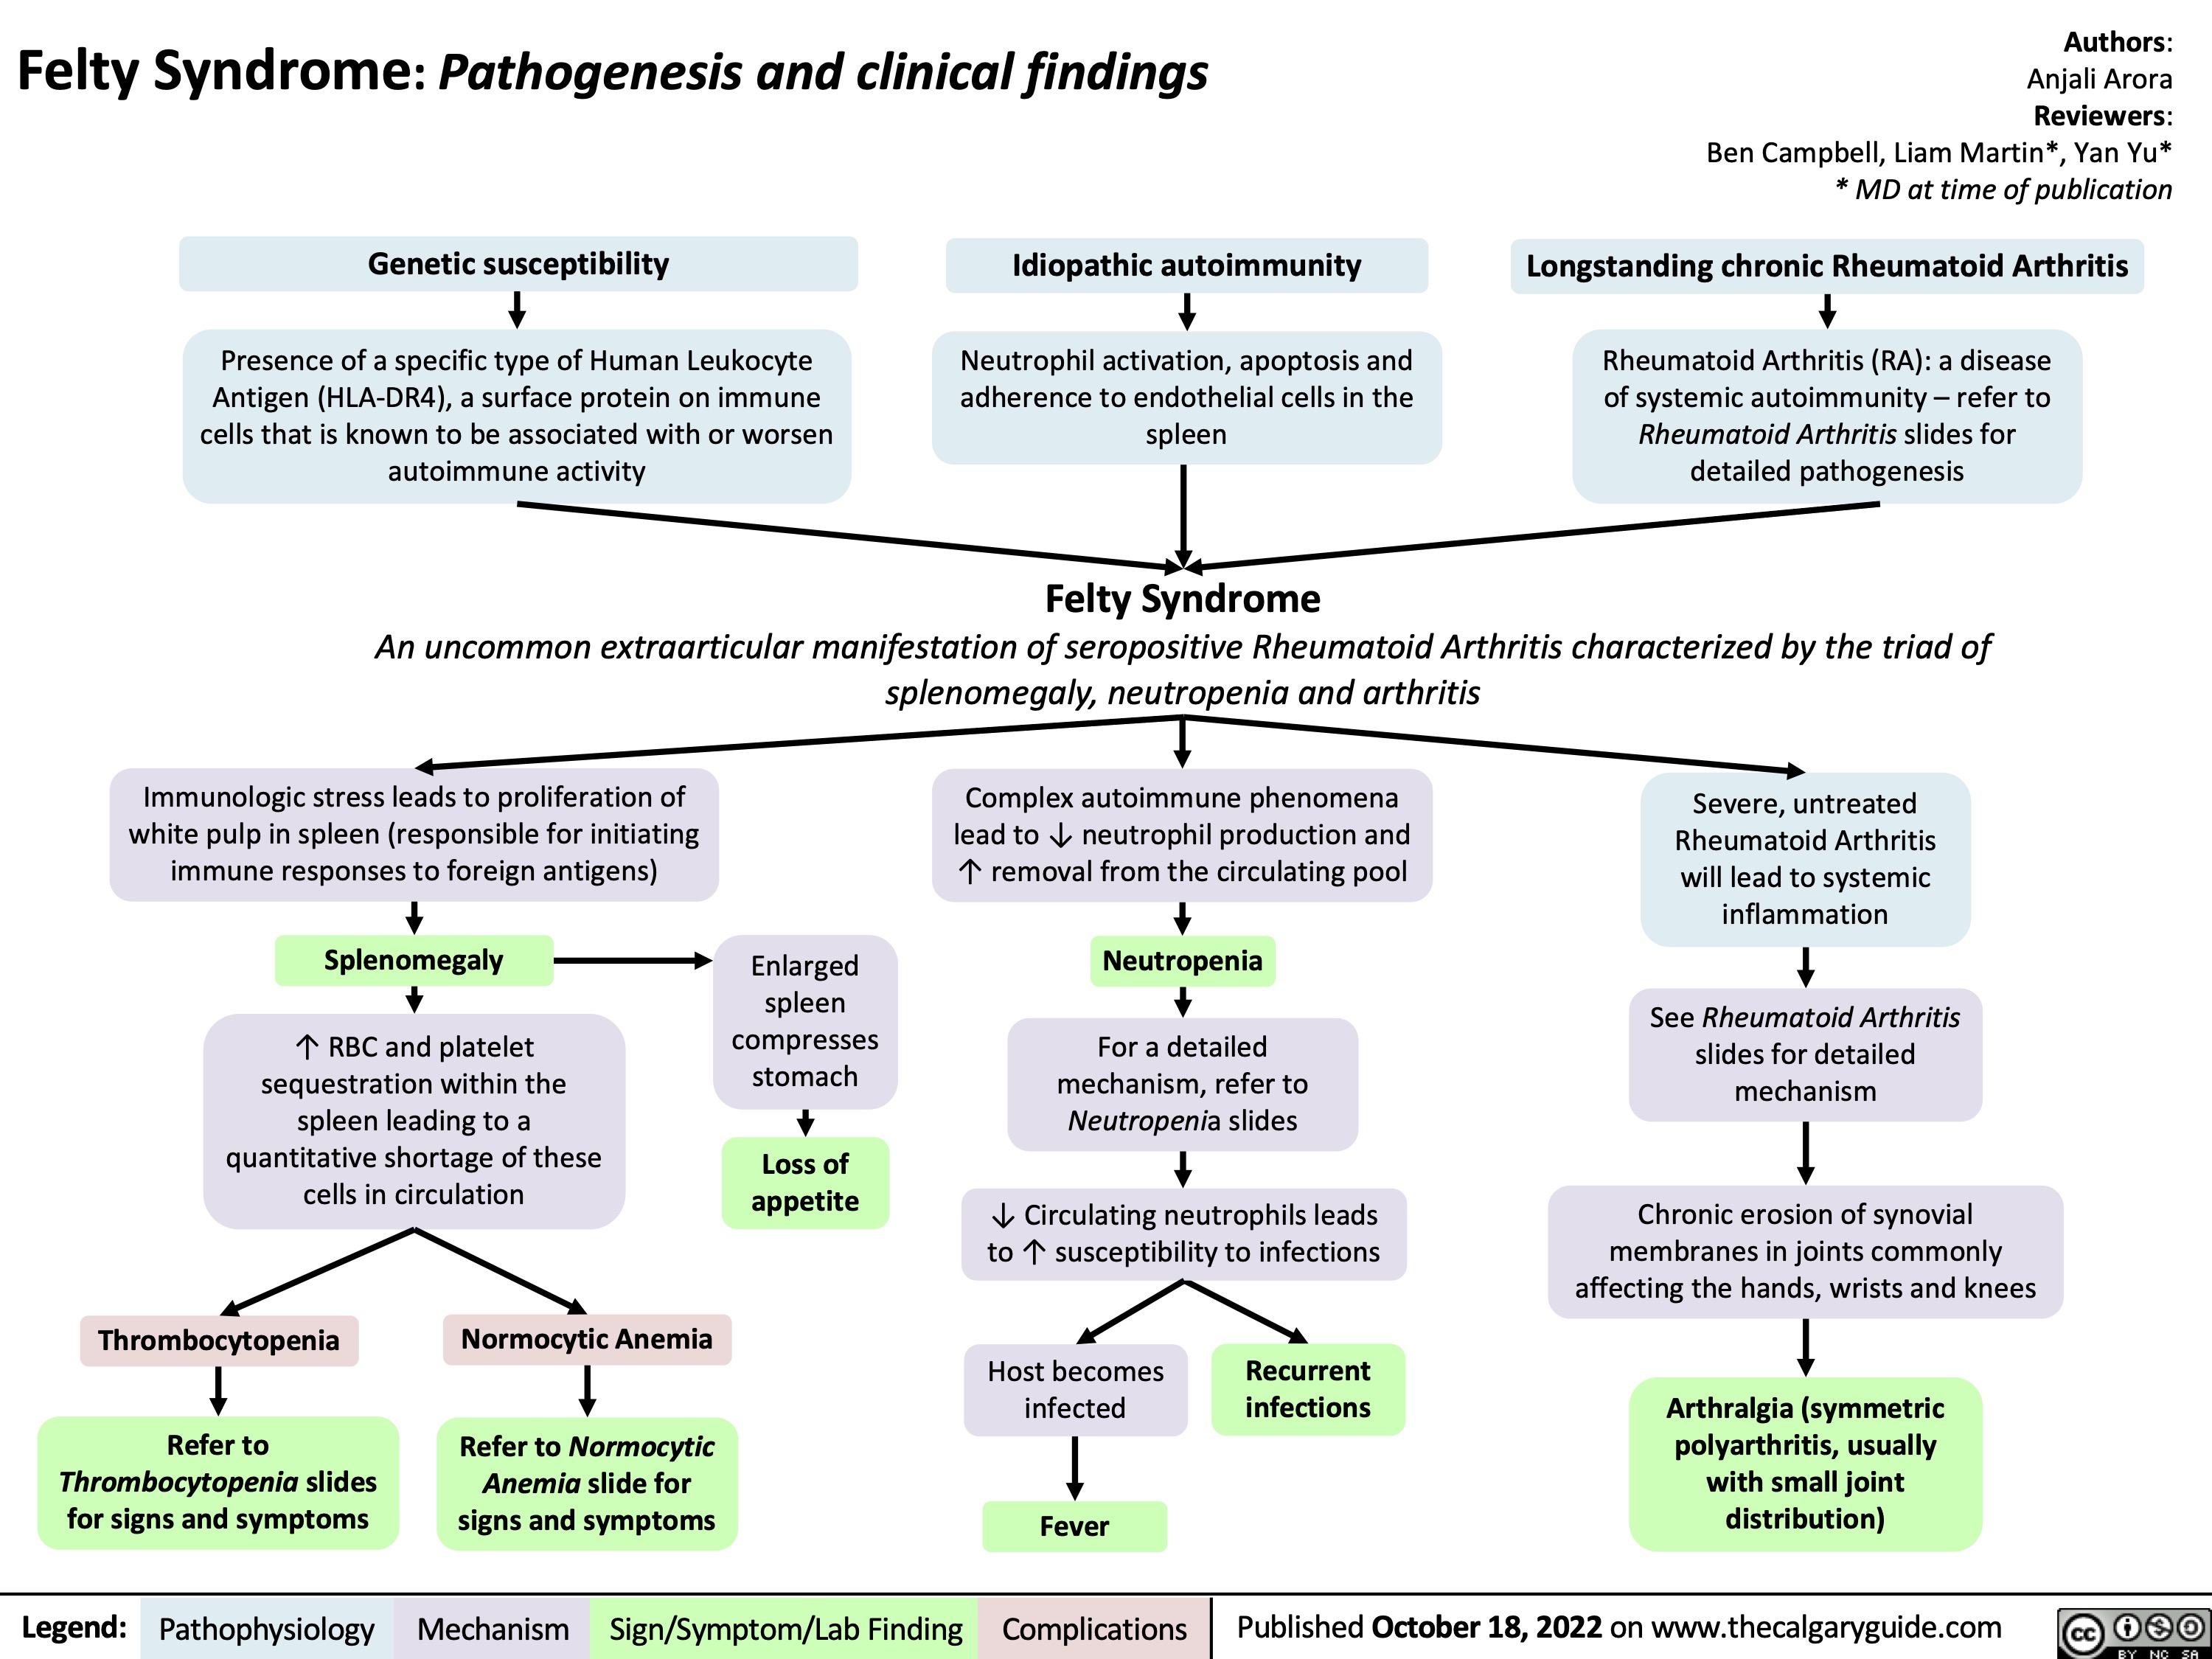 Felty Syndrome: Pathogenesis and clinical findings
Authors: Anjali Arora Reviewers: Ben Campbell, Liam Martin*, Yan Yu* * MD at time of publication
Longstanding chronic Rheumatoid Arthritis
Rheumatoid Arthritis (RA): a disease of systemic autoimmunity – refer to Rheumatoid Arthritis slides for detailed pathogenesis
   Genetic susceptibility
Presence of a specific type of Human Leukocyte Antigen (HLA-DR4), a surface protein on immune cells that is known to be associated with or worsen autoimmune activity
Idiopathic autoimmunity
Neutrophil activation, apoptosis and adherence to endothelial cells in the spleen
Felty Syndrome
     An uncommon extraarticular manifestation of seropositive Rheumatoid Arthritis characterized by the triad of splenomegaly, neutropenia and arthritis
     Immunologic stress leads to proliferation of white pulp in spleen (responsible for initiating immune responses to foreign antigens)
Splenomegaly
↑ RBC and platelet sequestration within the spleen leading to a quantitative shortage of these cells in circulation
Enlarged spleen compresses stomach
Loss of appetite
Complex autoimmune phenomena lead to ↓ neutrophil production and ↑ removal from the circulating pool
Neutropenia
For a detailed mechanism, refer to Neutropenia slides
↓ Circulating neutrophils leads to ↑ susceptibility to infections
Severe, untreated Rheumatoid Arthritis will lead to systemic inflammation
See Rheumatoid Arthritis slides for detailed mechanism
Chronic erosion of synovial membranes in joints commonly affecting the hands, wrists and knees
Arthralgia (symmetric polyarthritis, usually with small joint distribution)
               Thrombocytopenia
Refer to Thrombocytopenia slides for signs and symptoms
Normocytic Anemia Refer to Normocytic
Anemia slide for signs and symptoms
Host becomes infected
Fever
Recurrent infections
       Legend:
 Pathophysiology
 Mechanism
Sign/Symptom/Lab Finding
 Complications
Published October 18, 2022 on www.thecalgaryguide.com
   